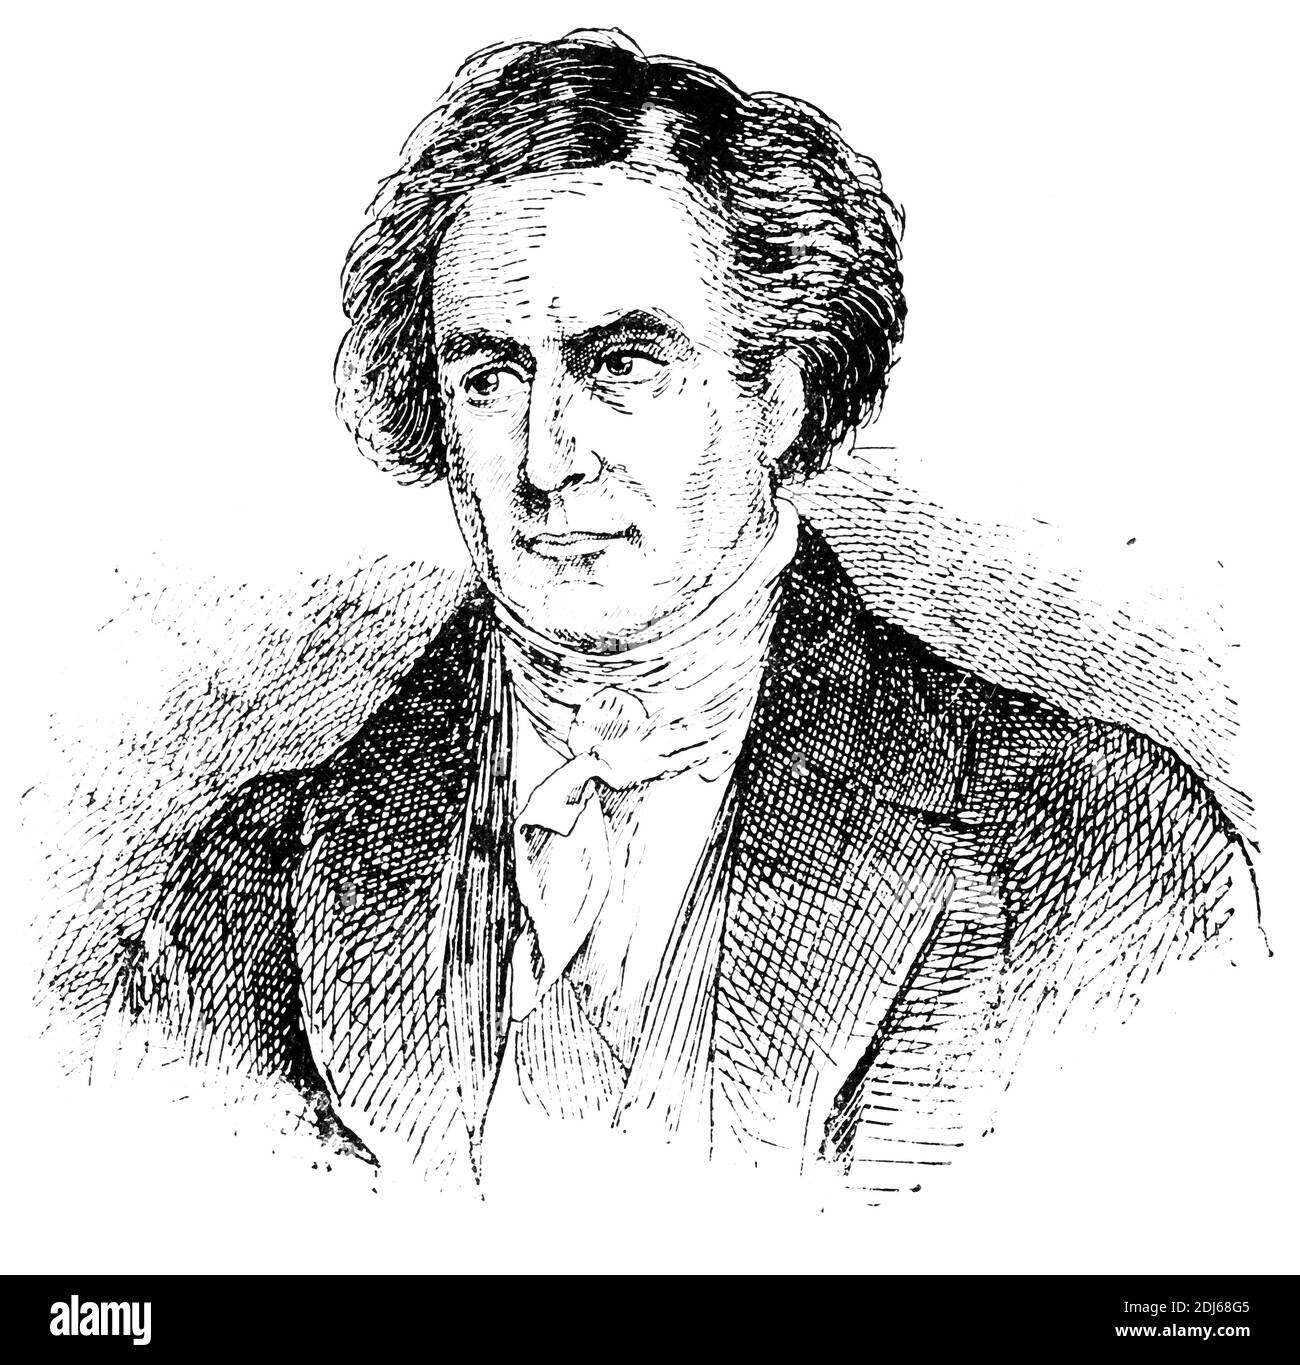 Portrait of Dominique Francois Jean Arago - a French mathematician, physicist, astronomer, freemason, and politician. Illustration of the 19th century. Germany. White background. Stock Photo